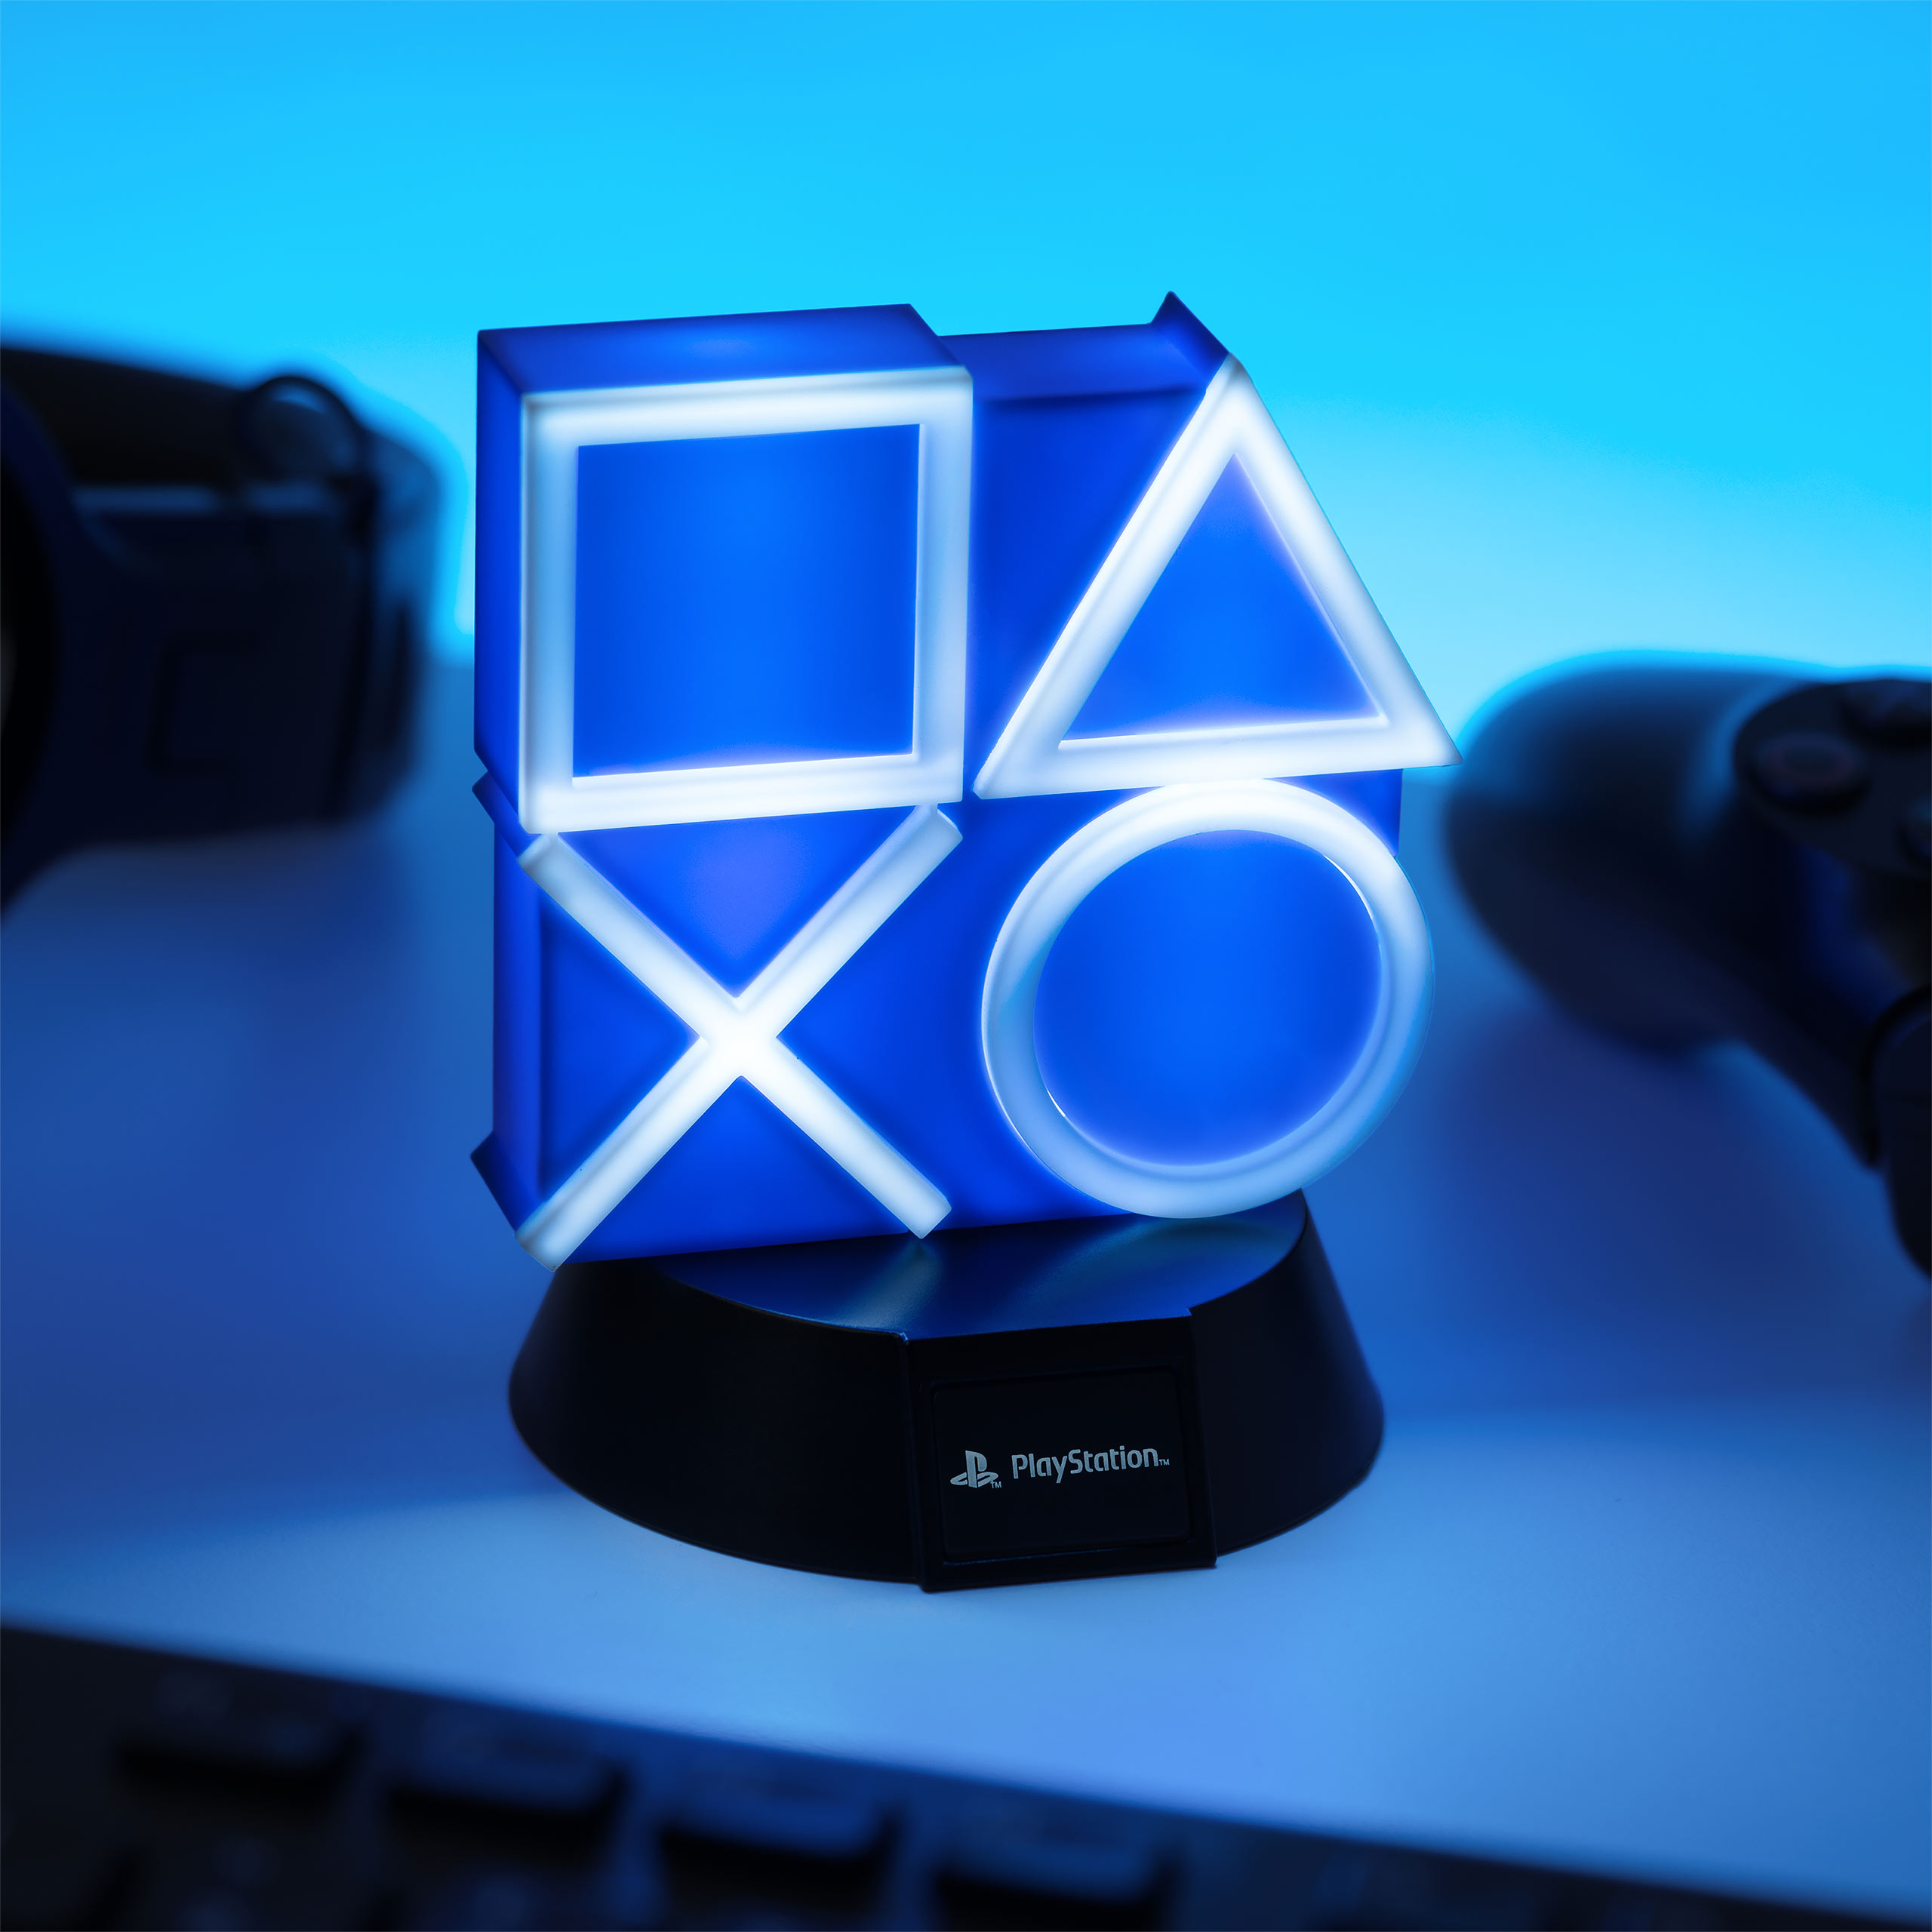 PlayStation Icons 3D Tischlampe